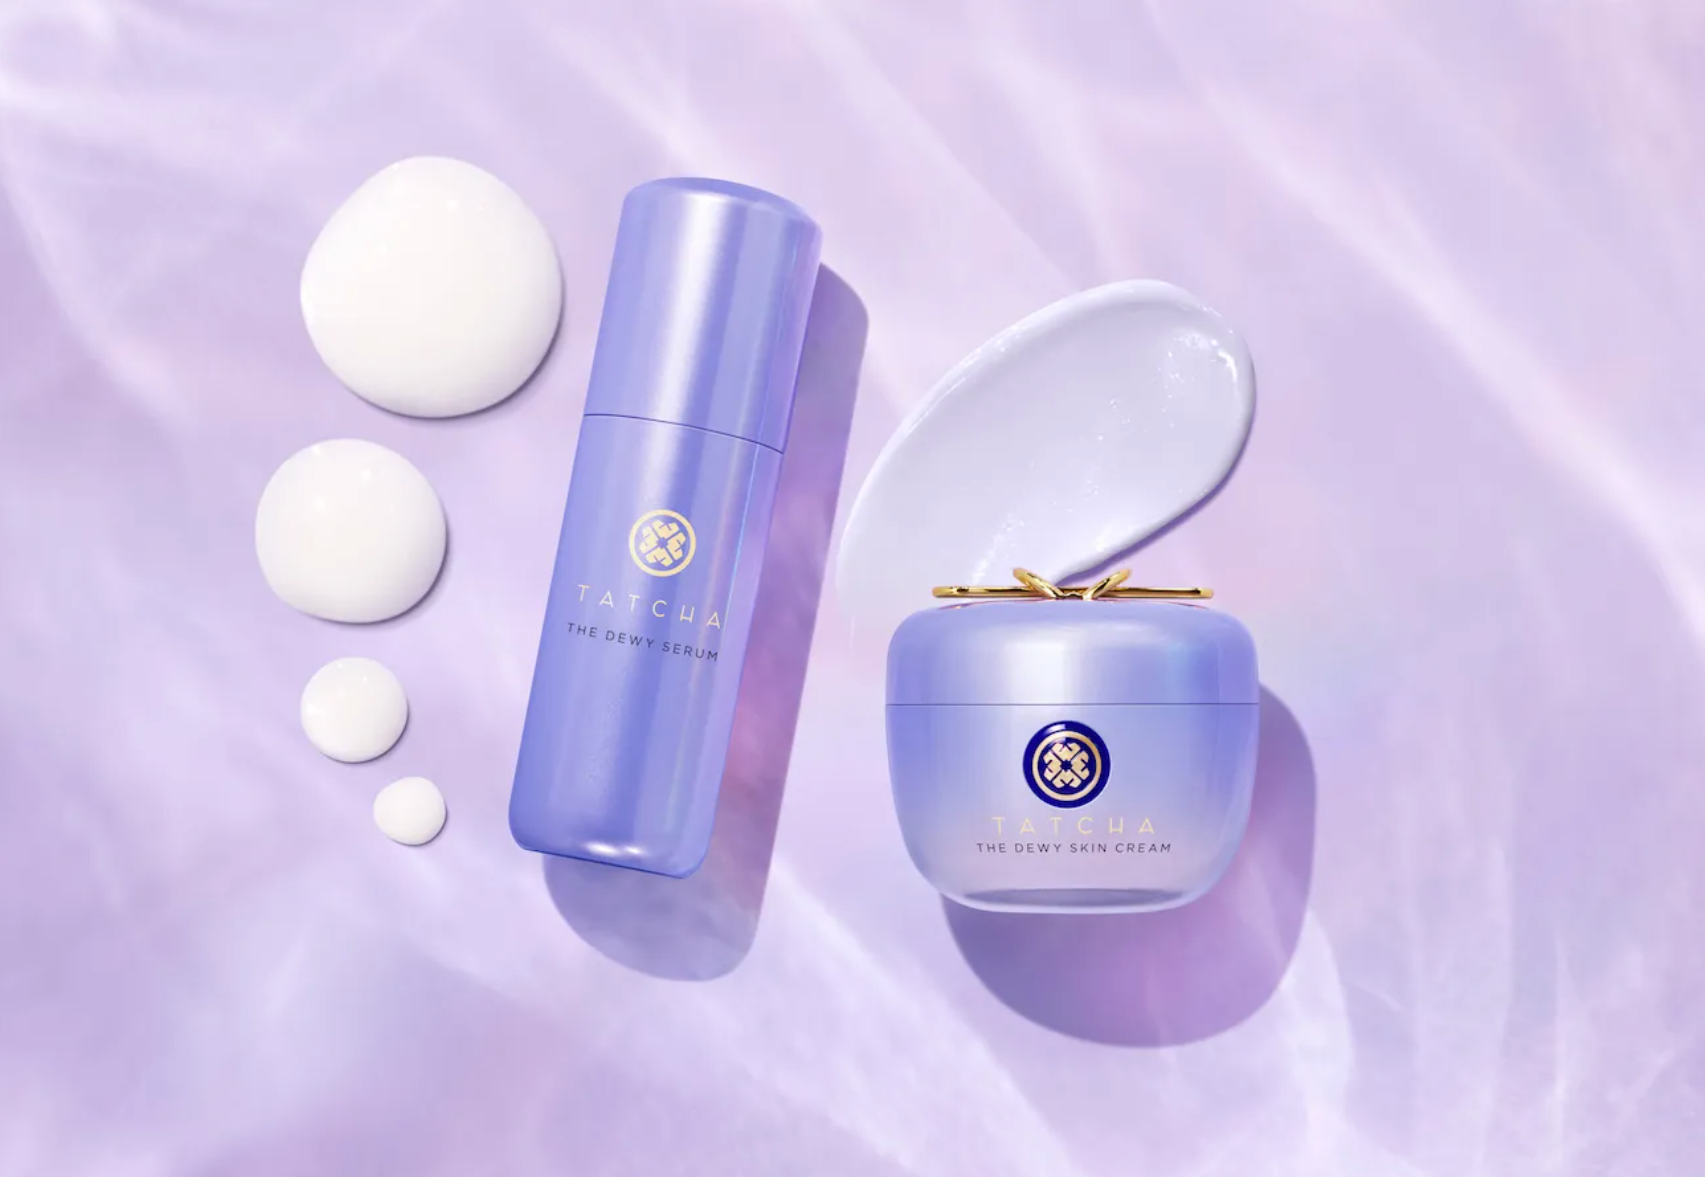 The 20 Best Face and For Skin: Shop Laneige, Tatcha, Sunday Riley More | Entertainment Tonight